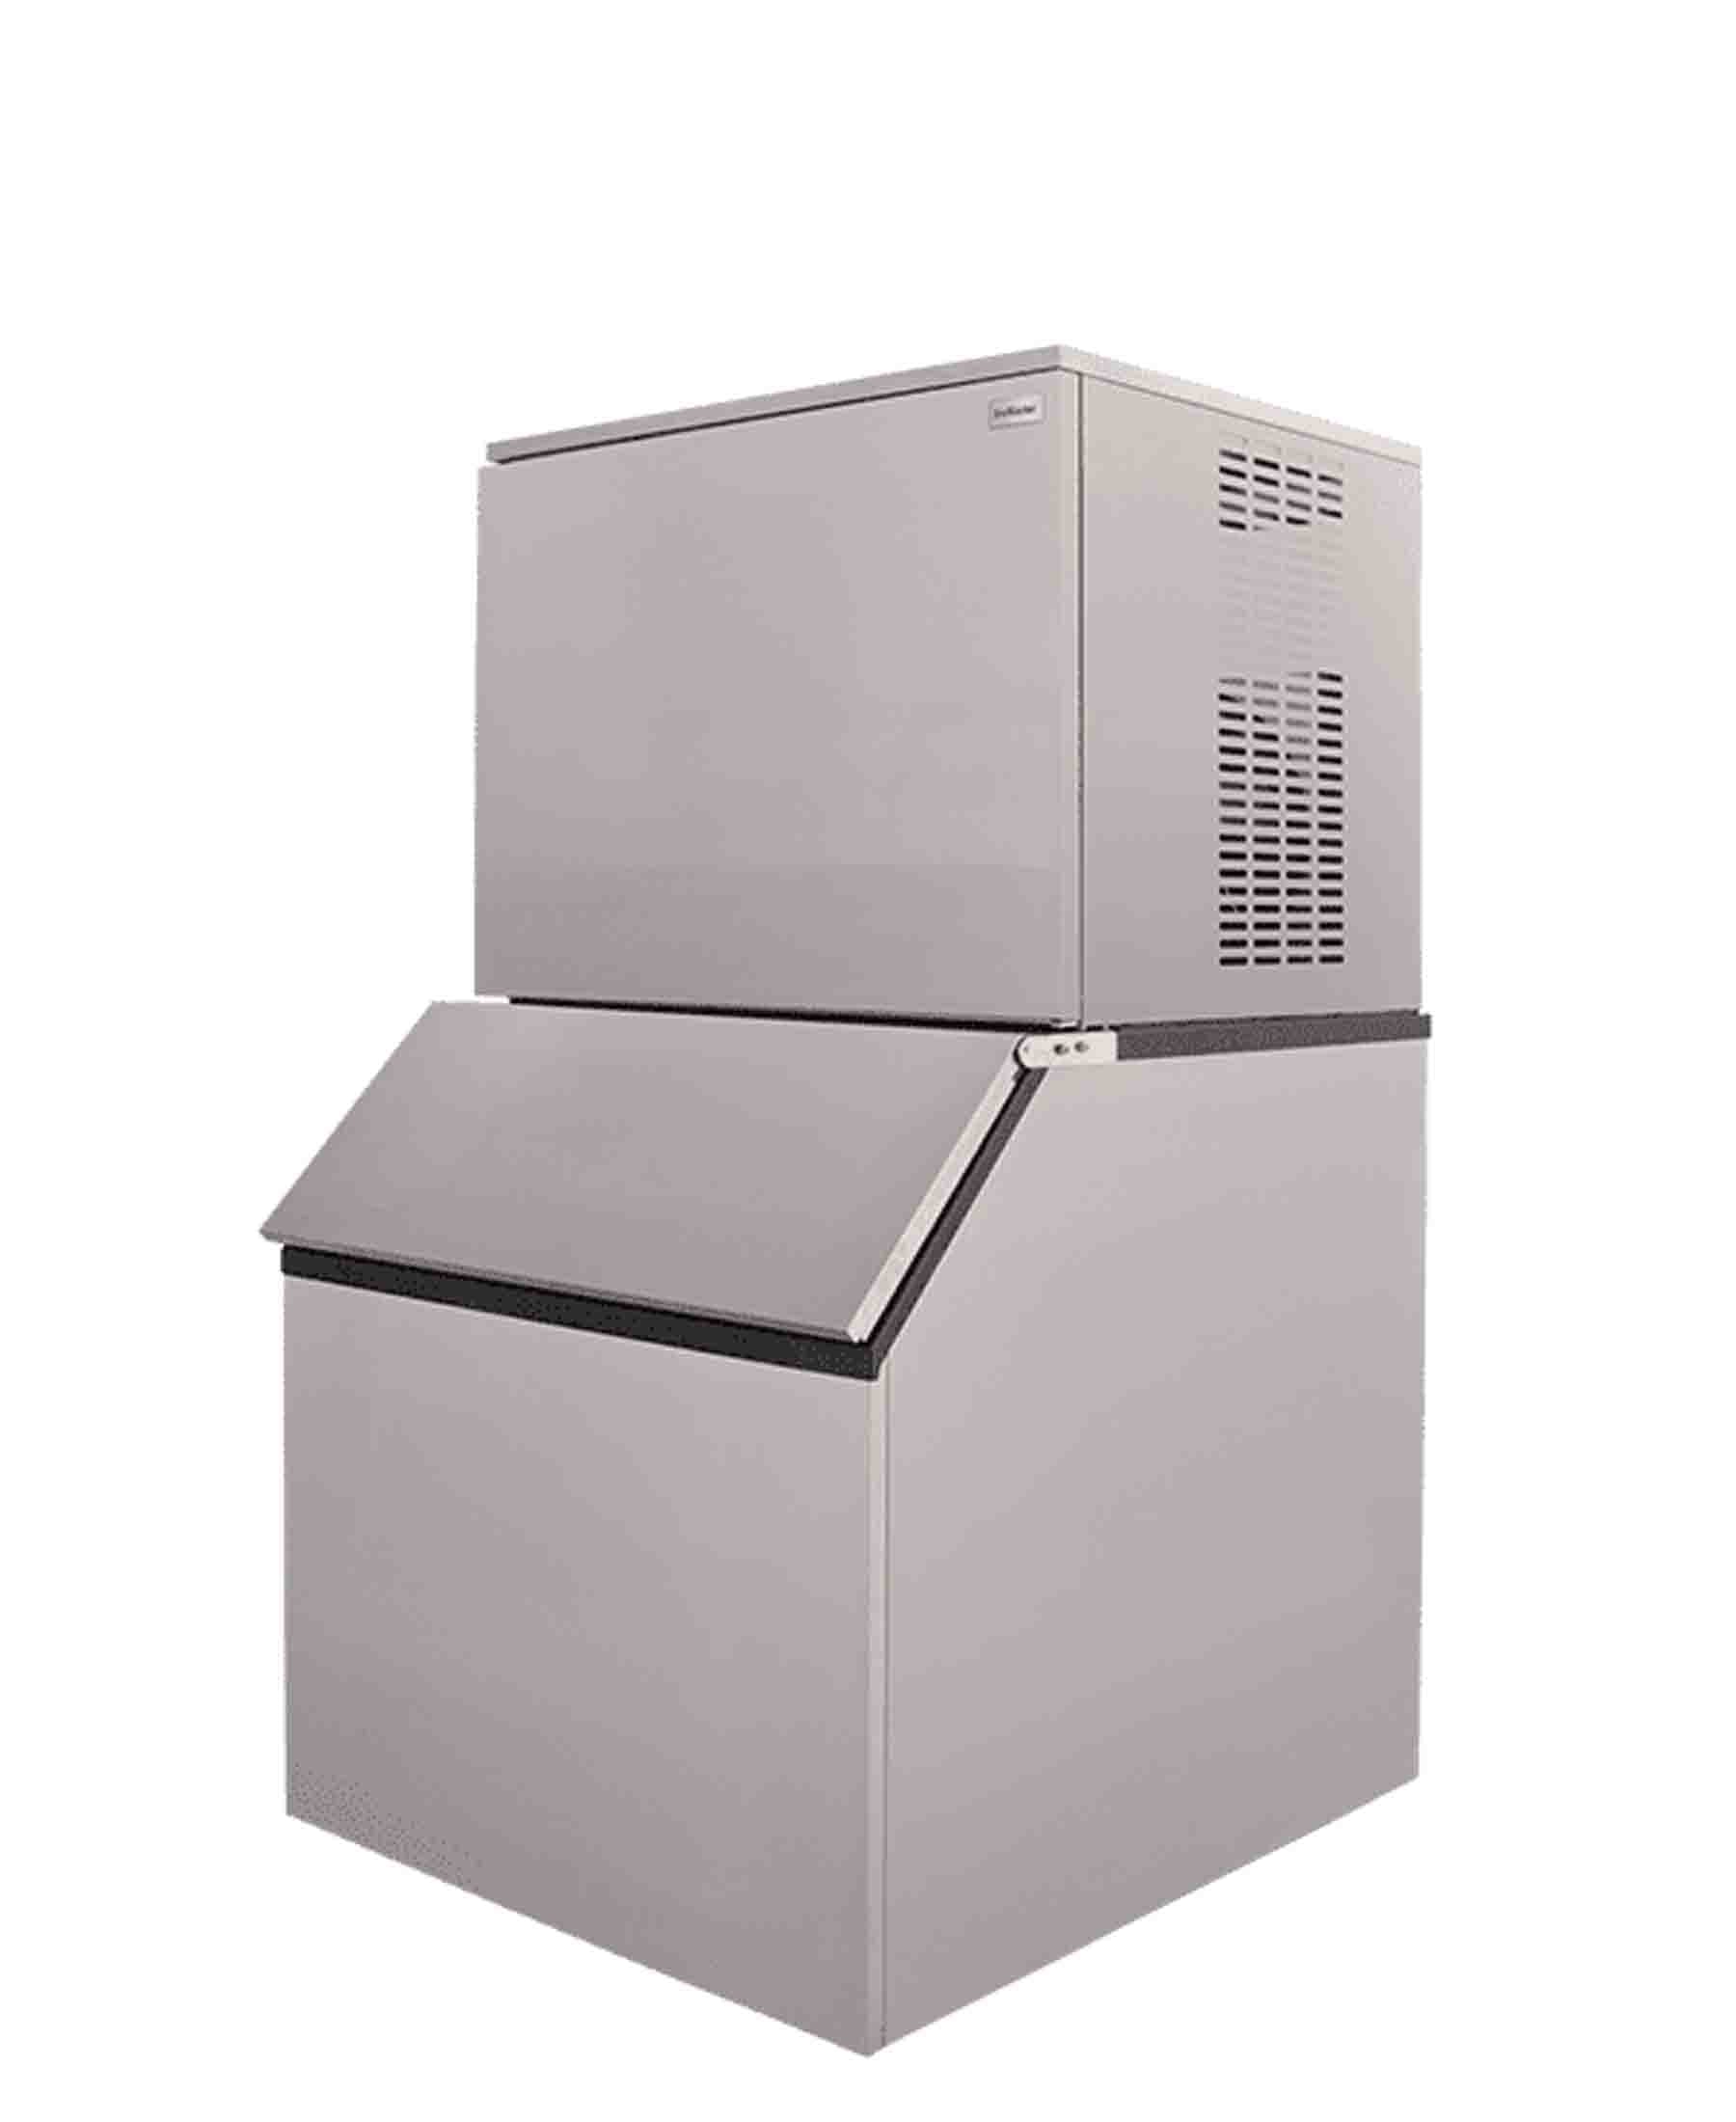 SnoMaster 150kg Plumbed-In Commercial Ice Maker - Silver